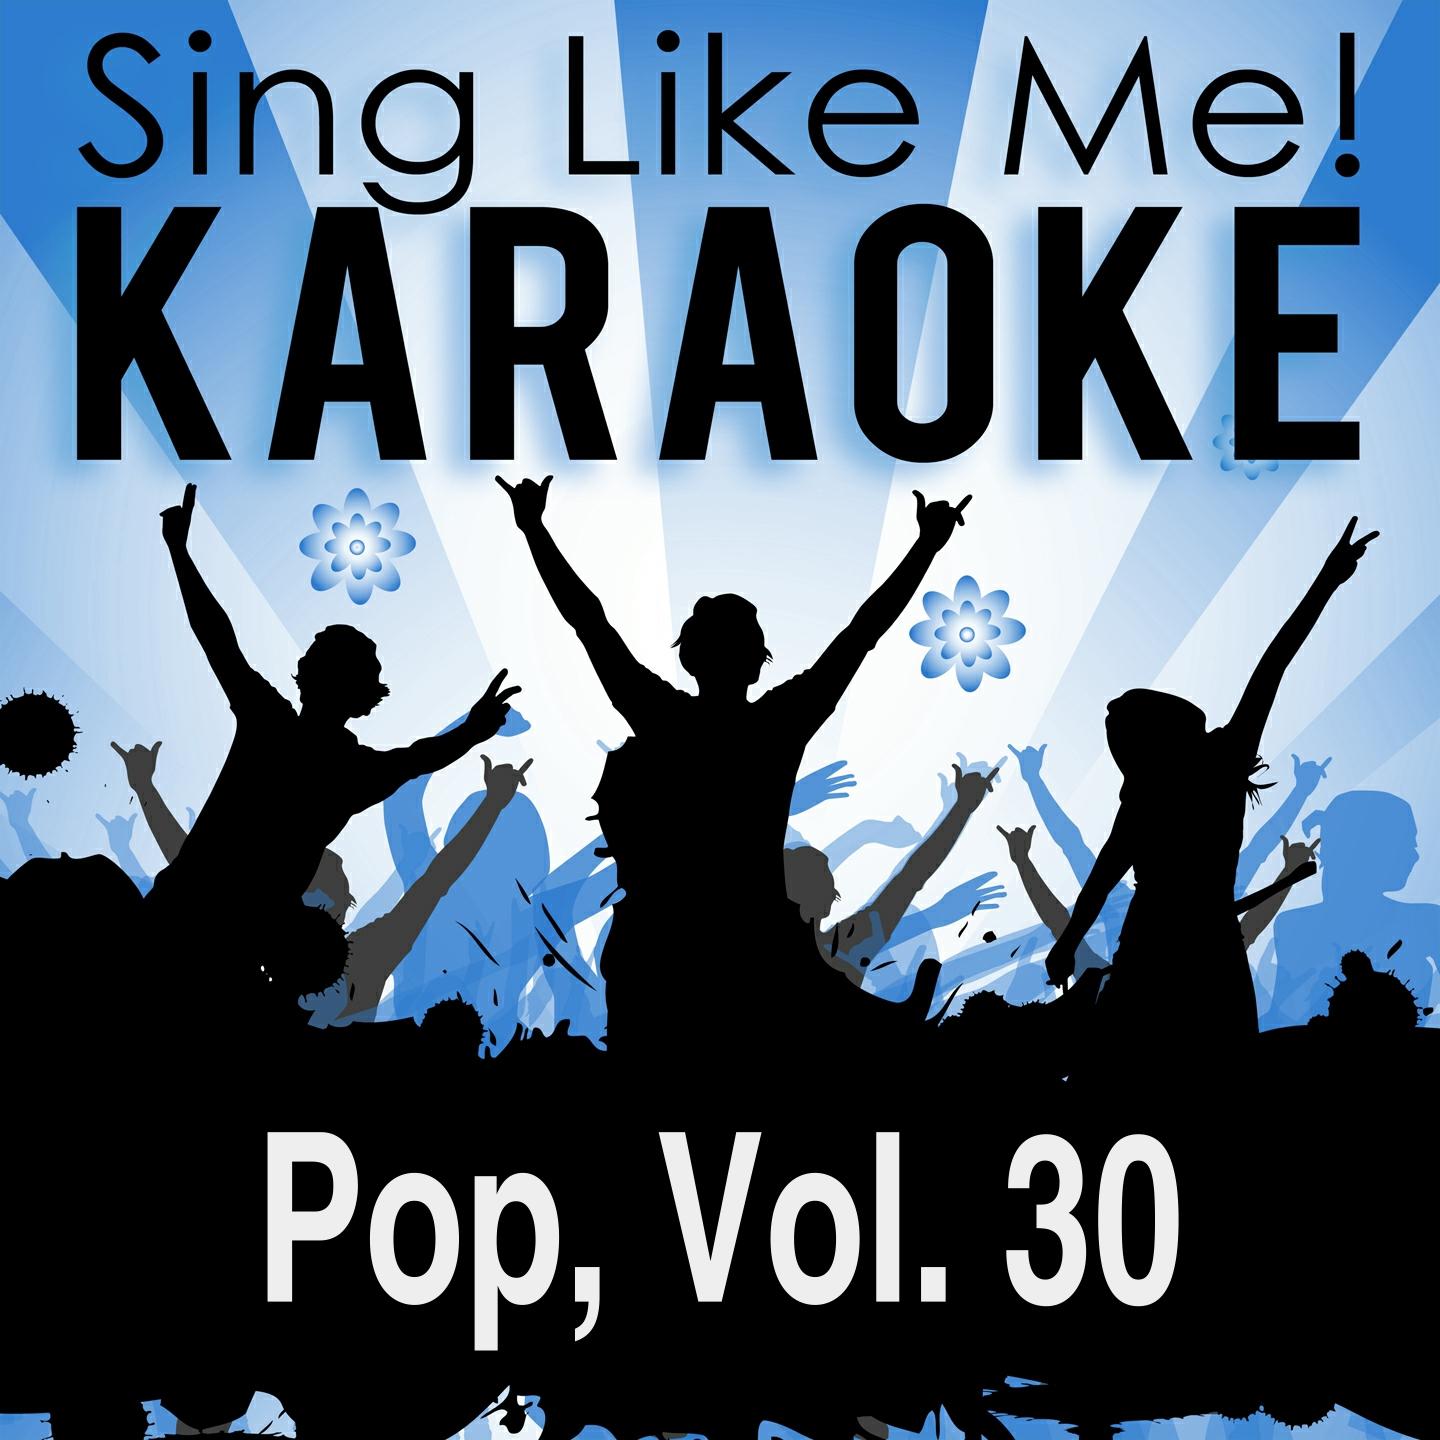 Work ***** (Karaoke Version With Guide Melody) (Originally Performed By Britney Spears)